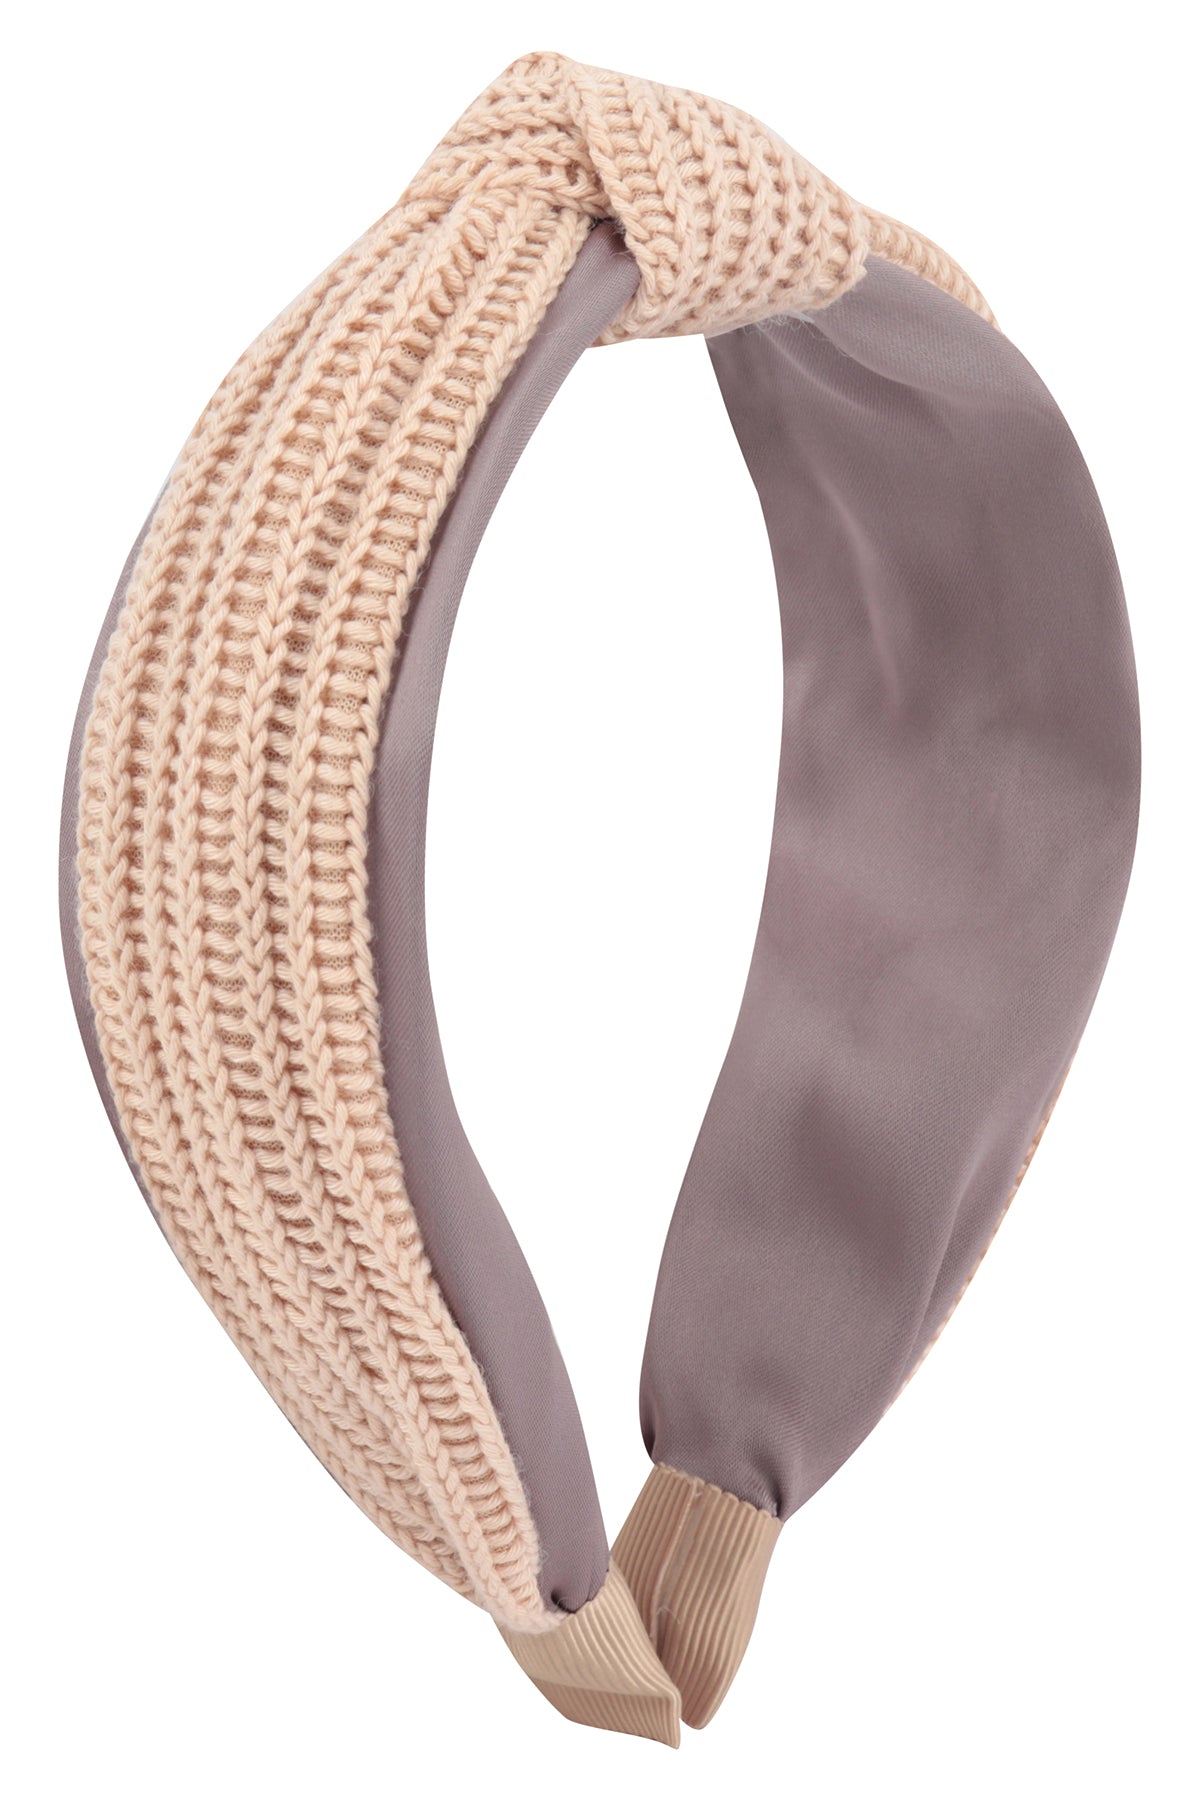 KNITTED KNOT HEADBAND HAIR ACCESORIES